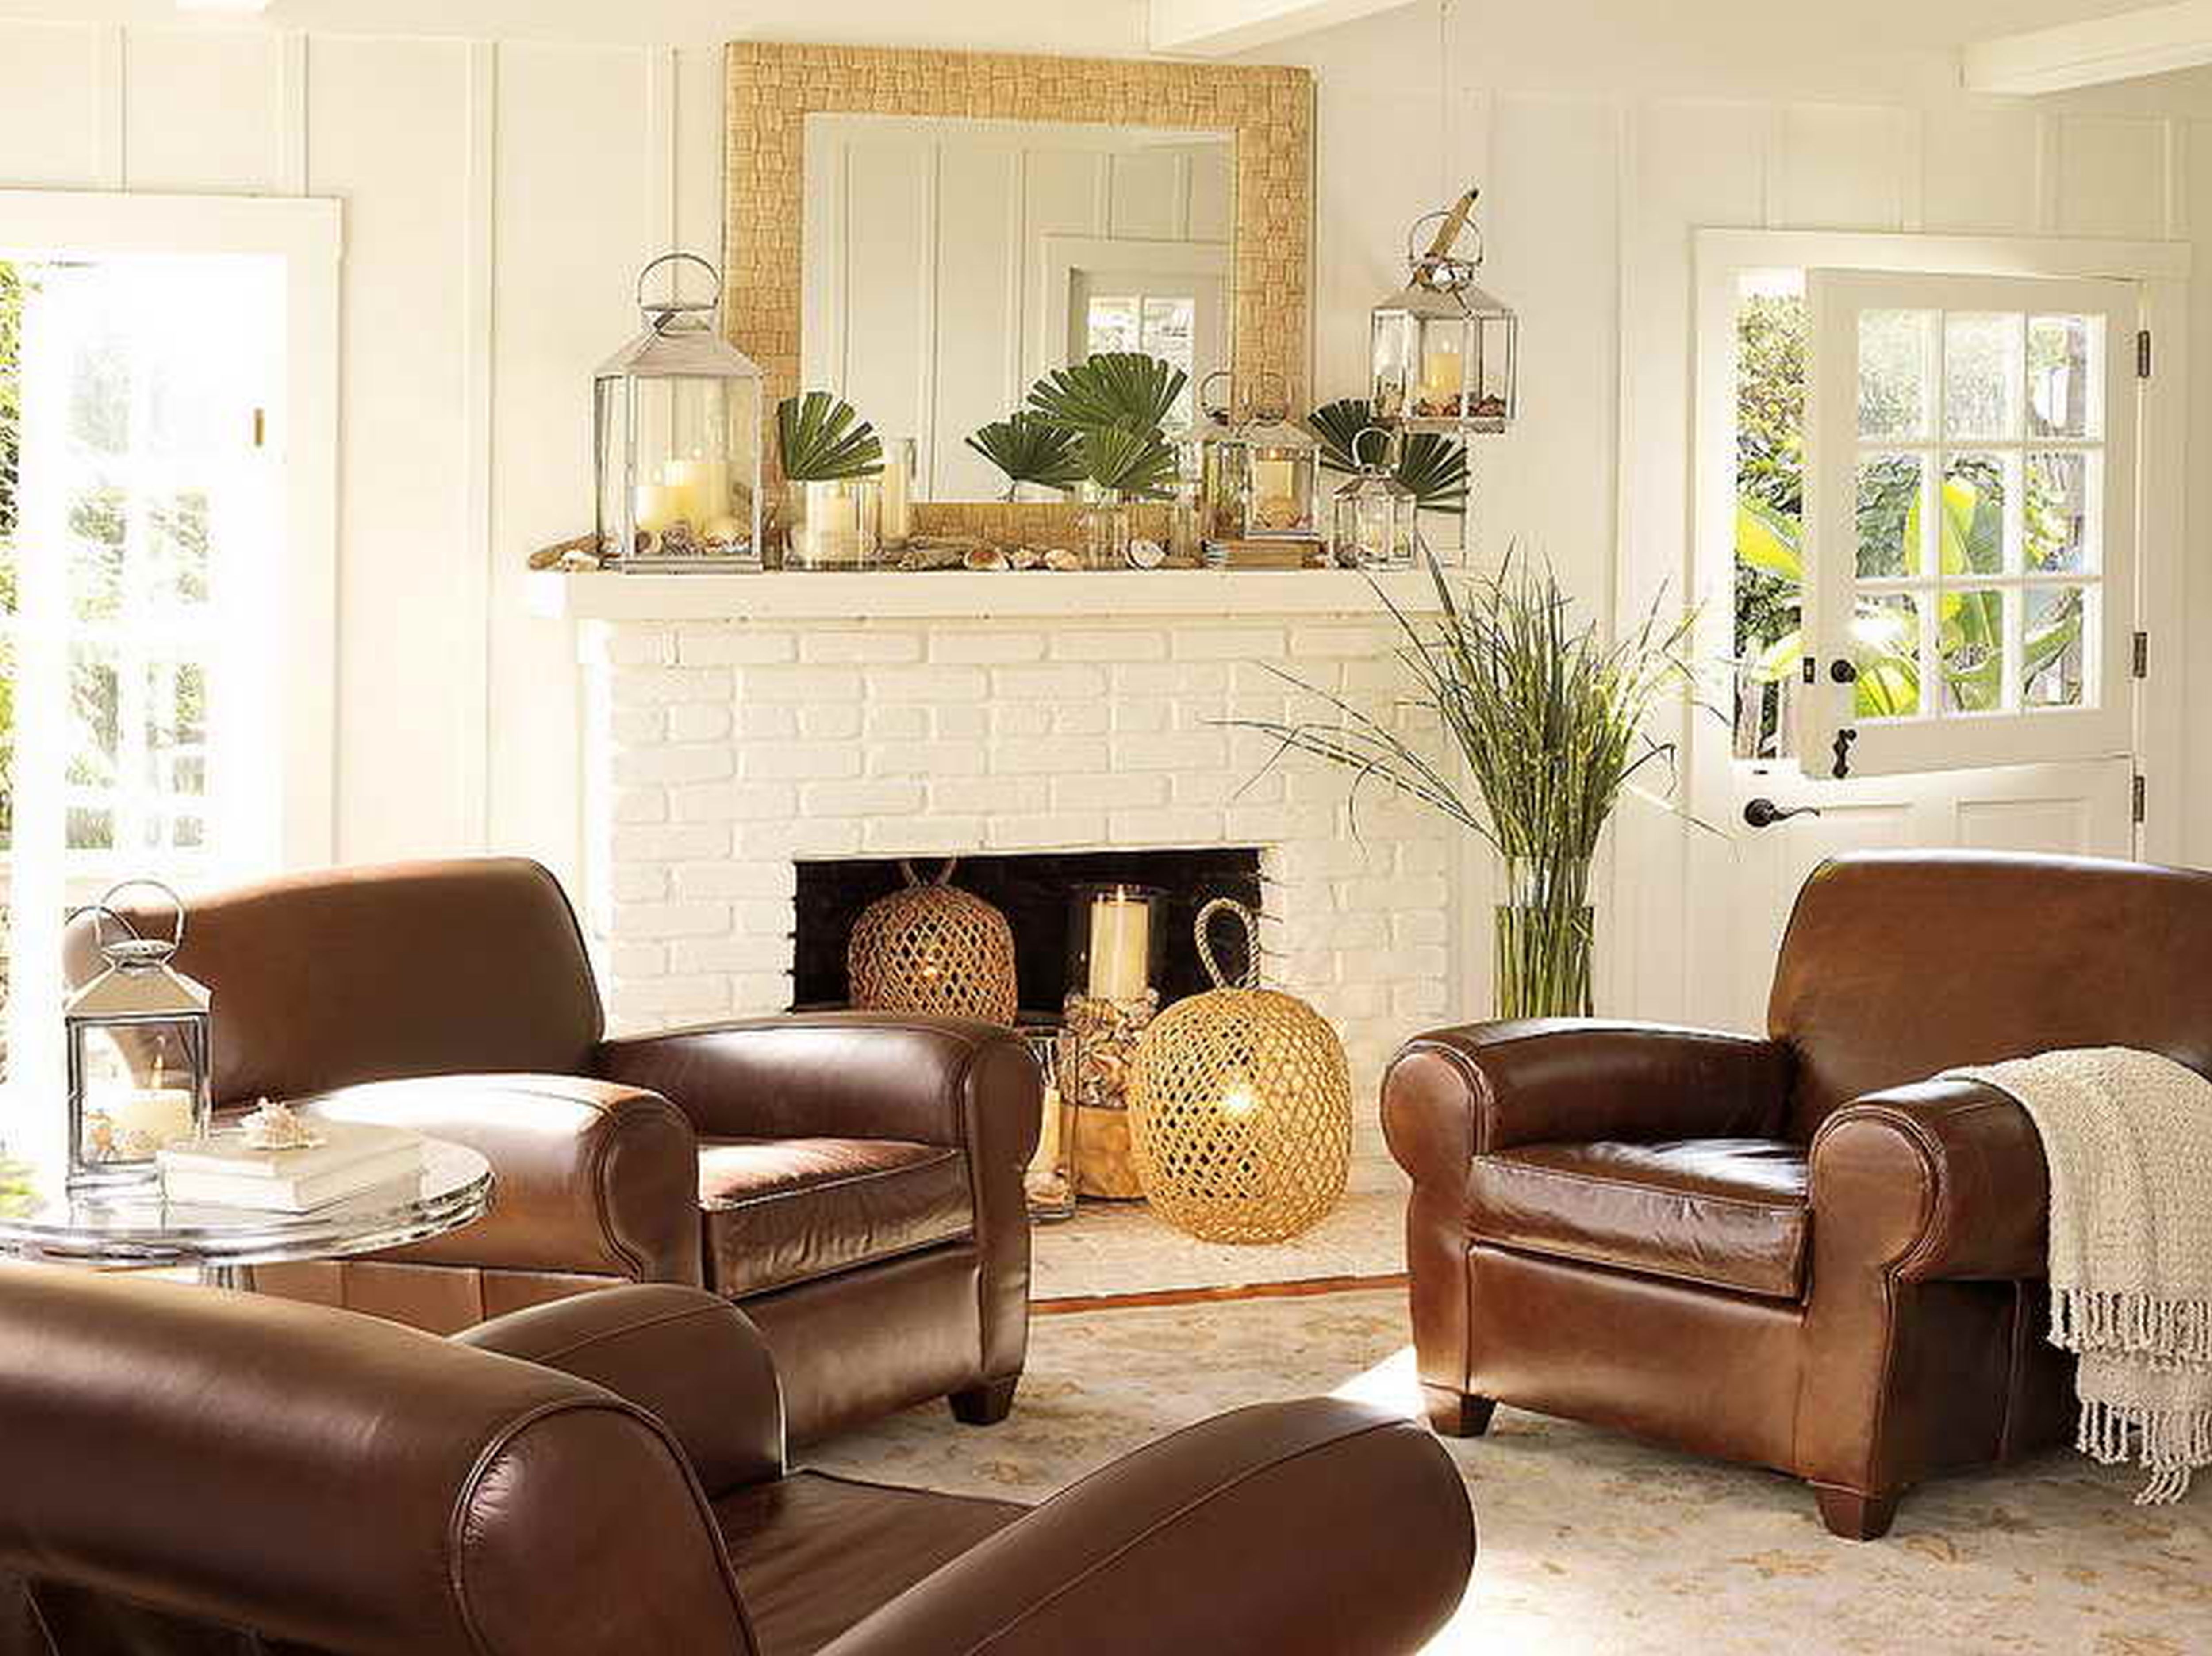 Decorative Home Decor: Adding Beauty To Your Home